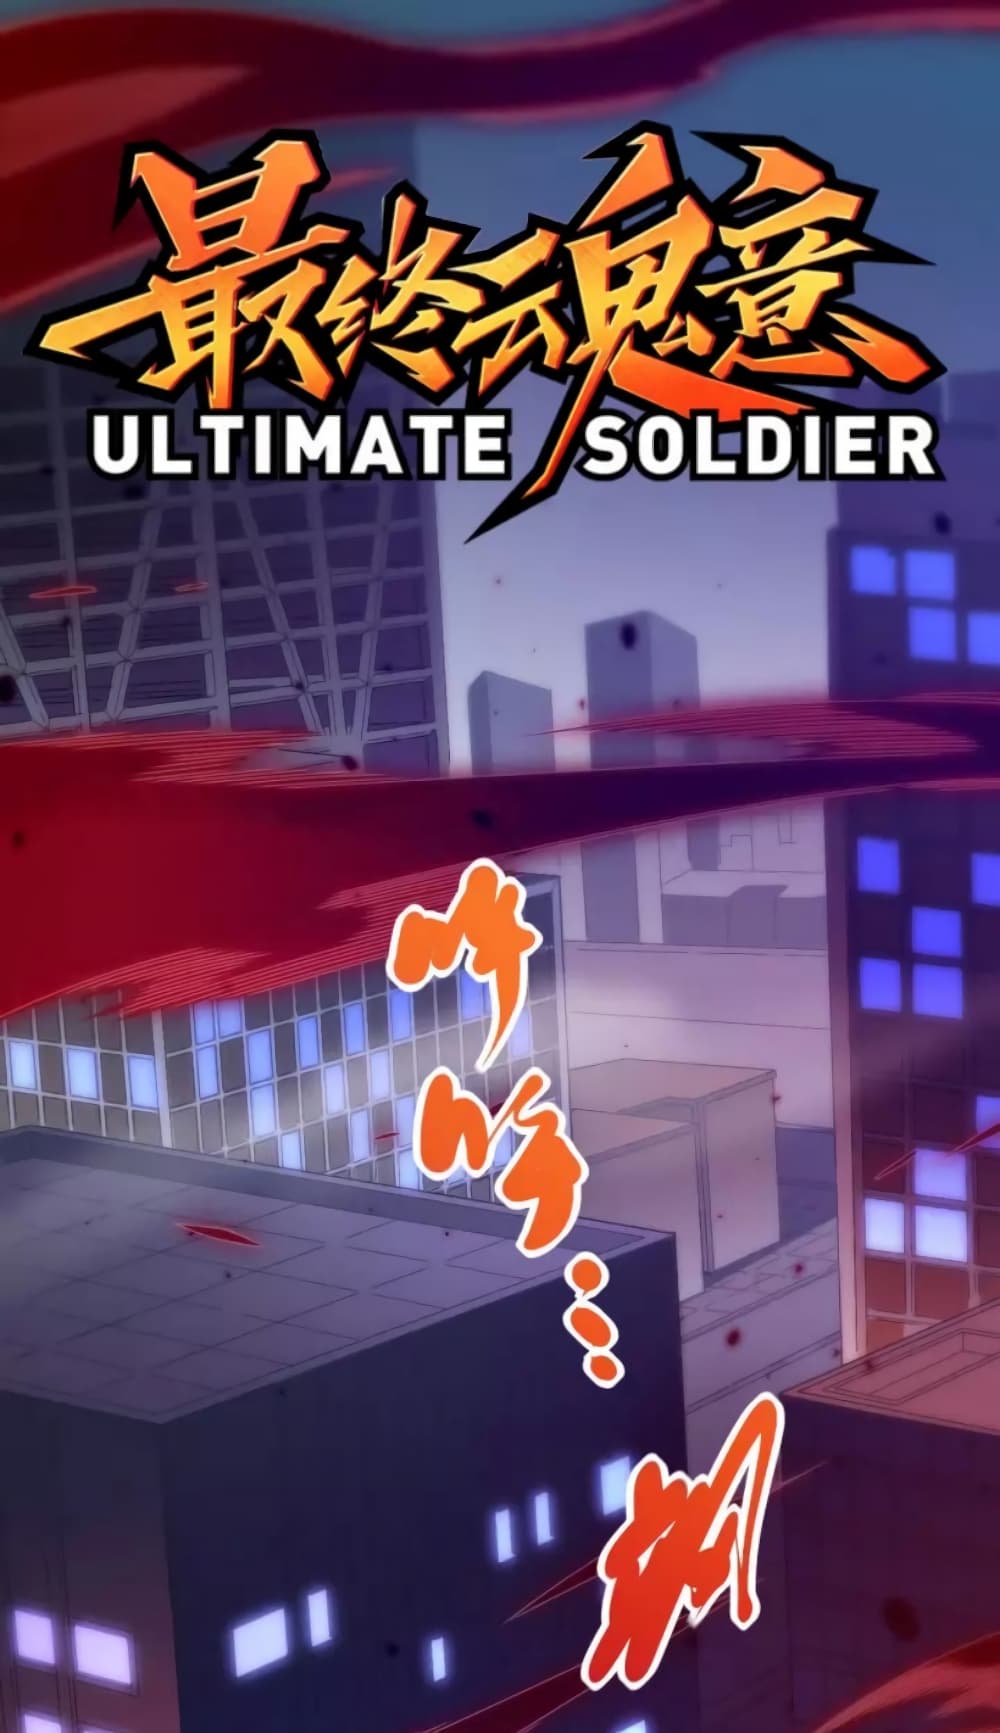 ULTIMATE SOLDIER 49-49